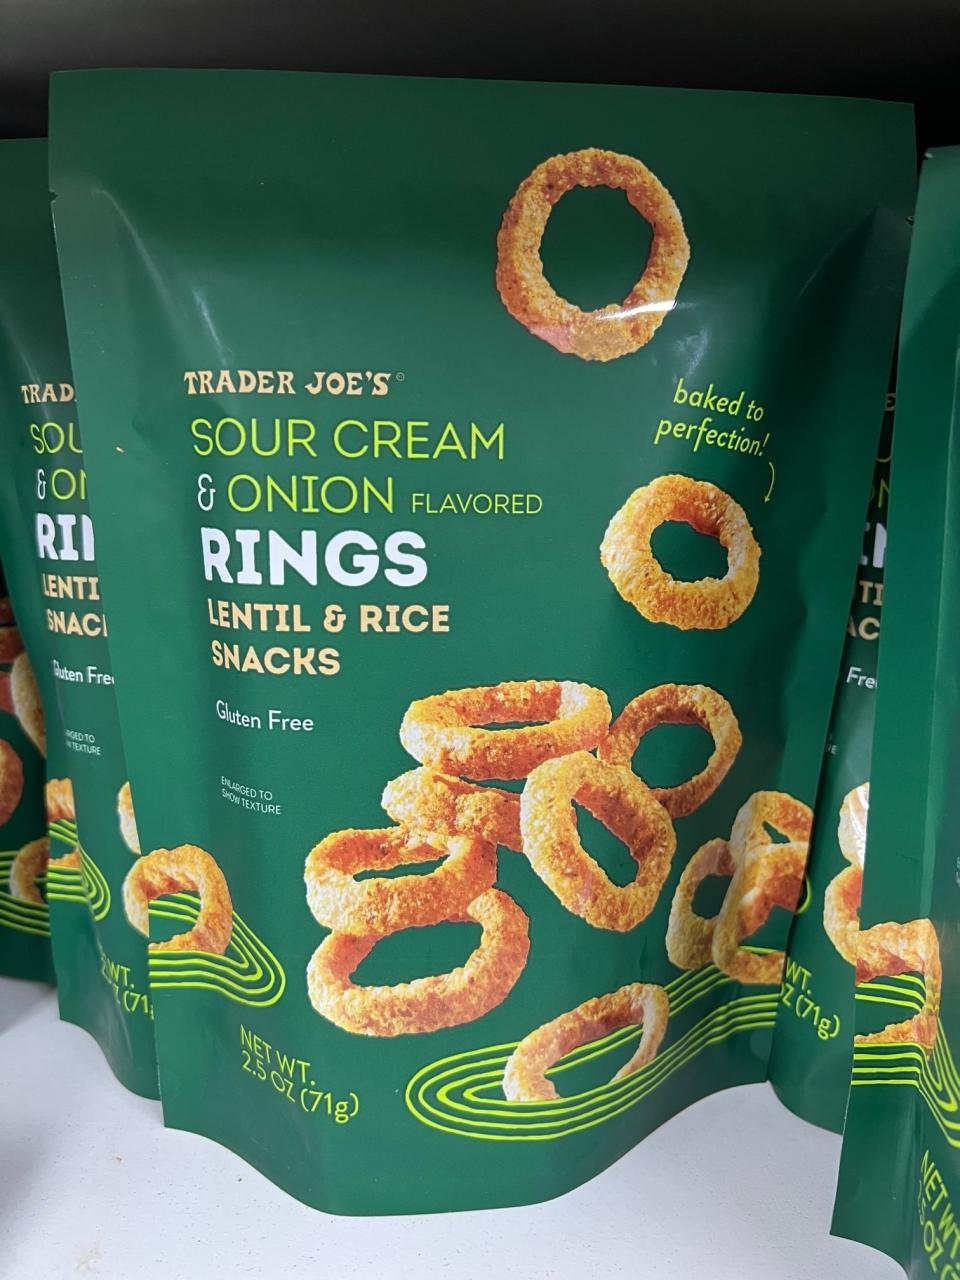 Sour Cream & Onion Flavored Rings